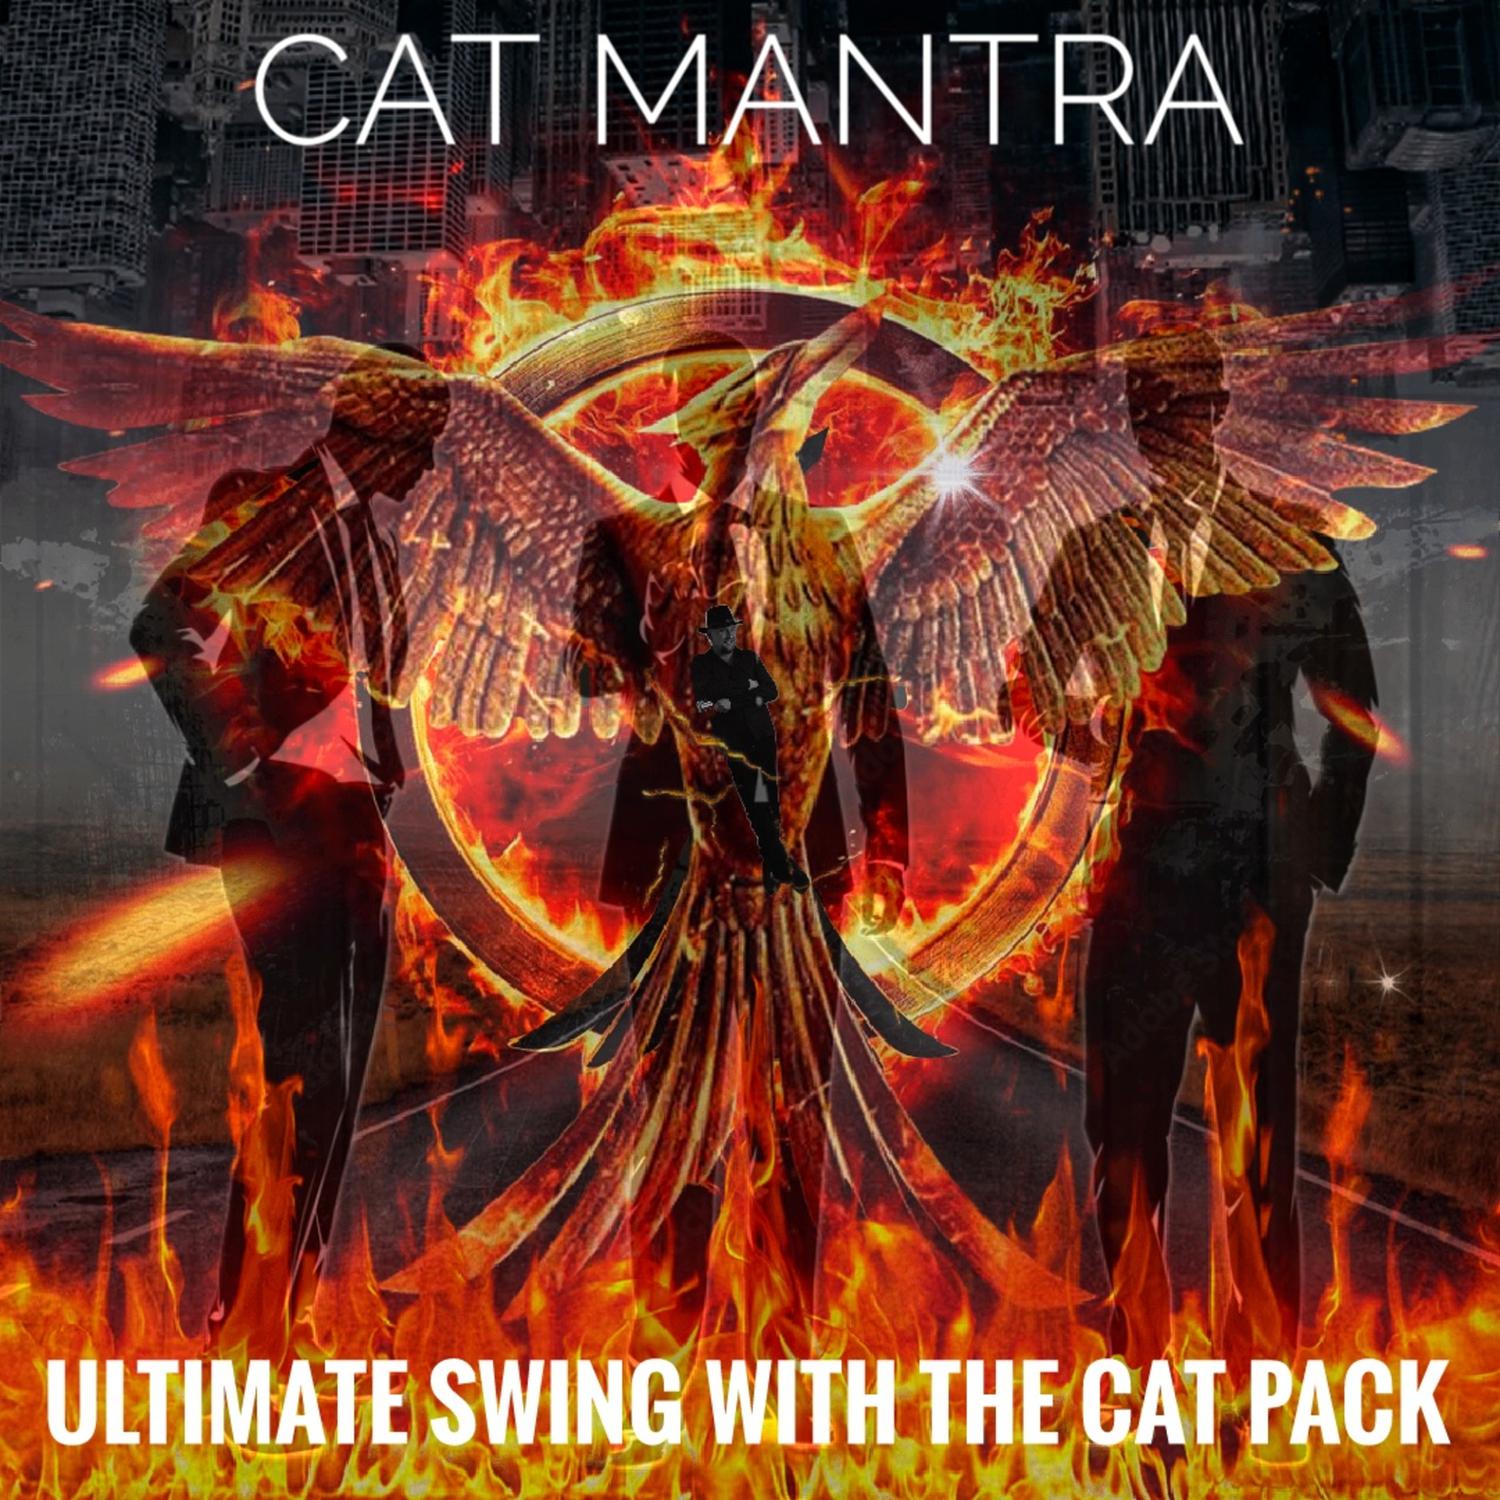 Cat Mantra - Let There Be Love